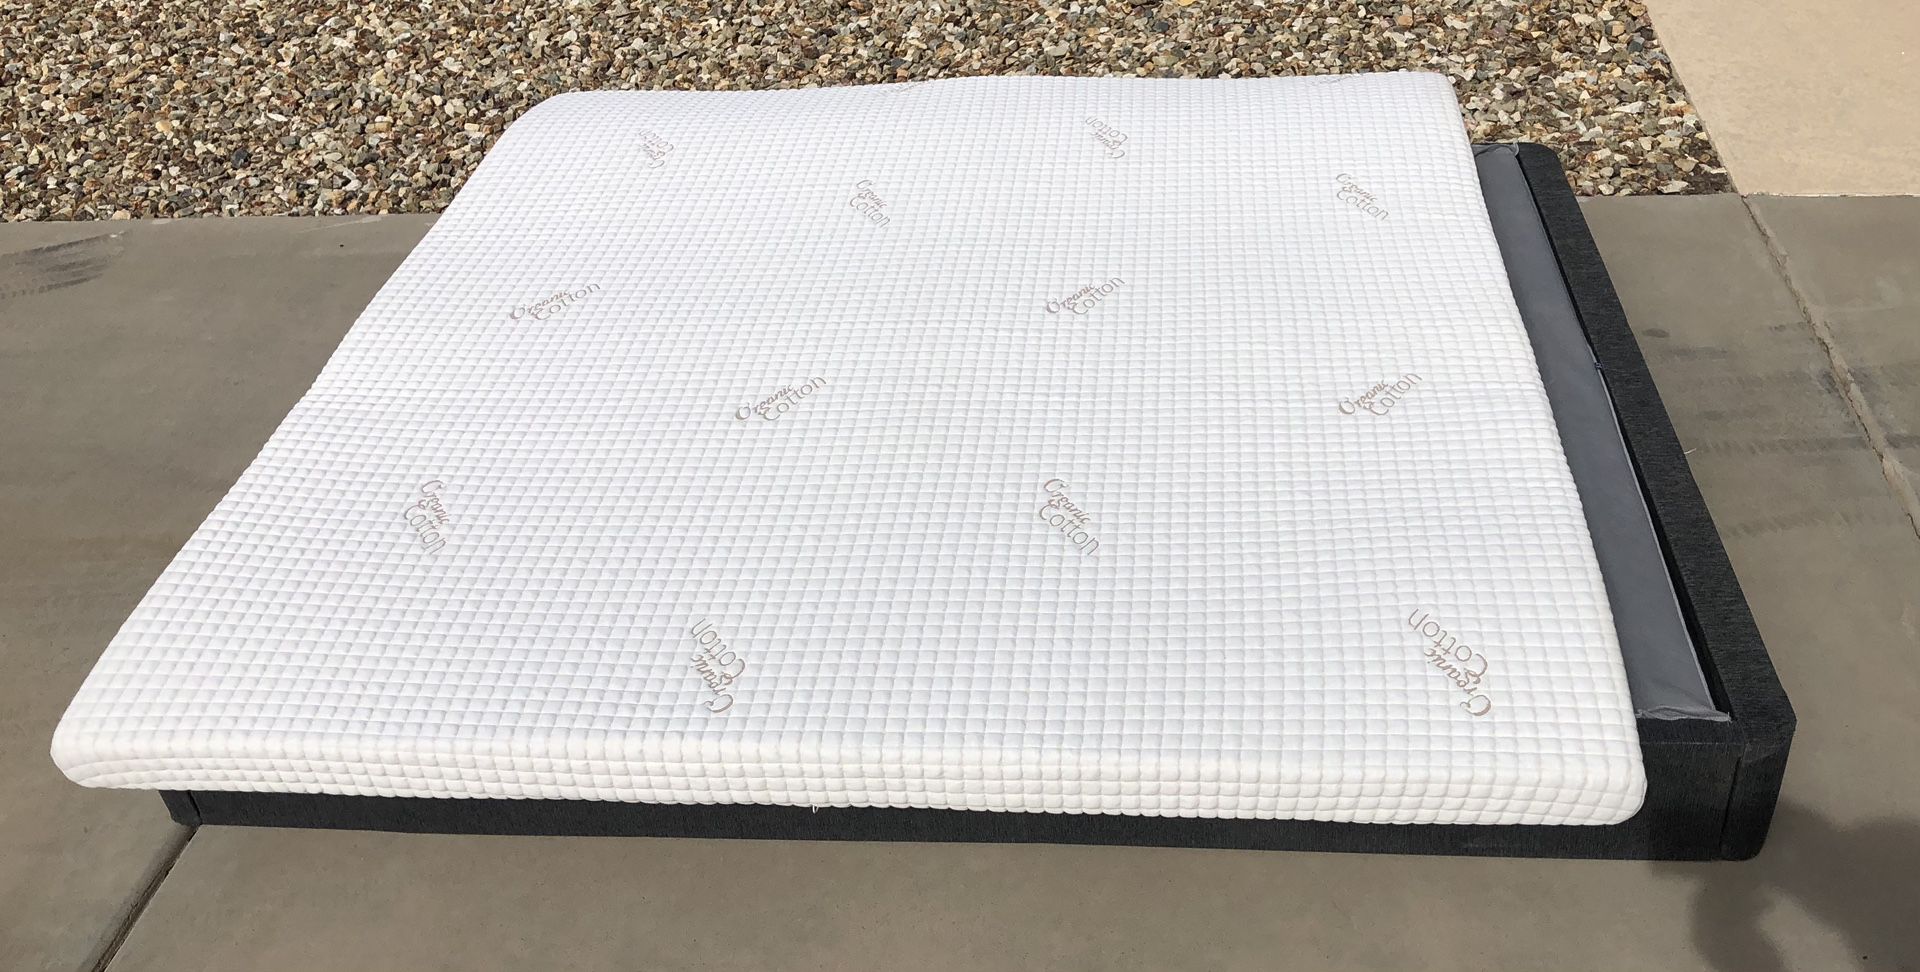 🟢 RV MOTORHOME KING SIZE MATRESS TOPPER CUSTOM MADE TO FIT MOTORHOME MATTRESS - PAID OVER $600 ASKING $300